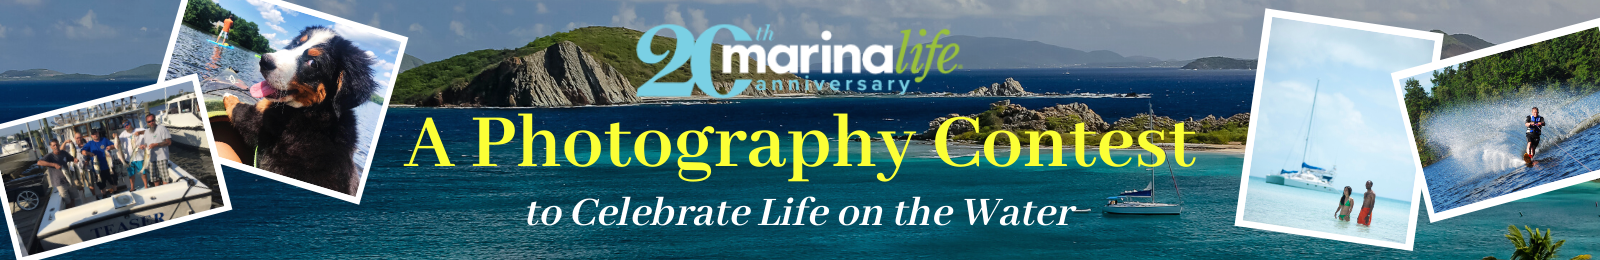 A Photography Contest to Celebrate Life on the Water